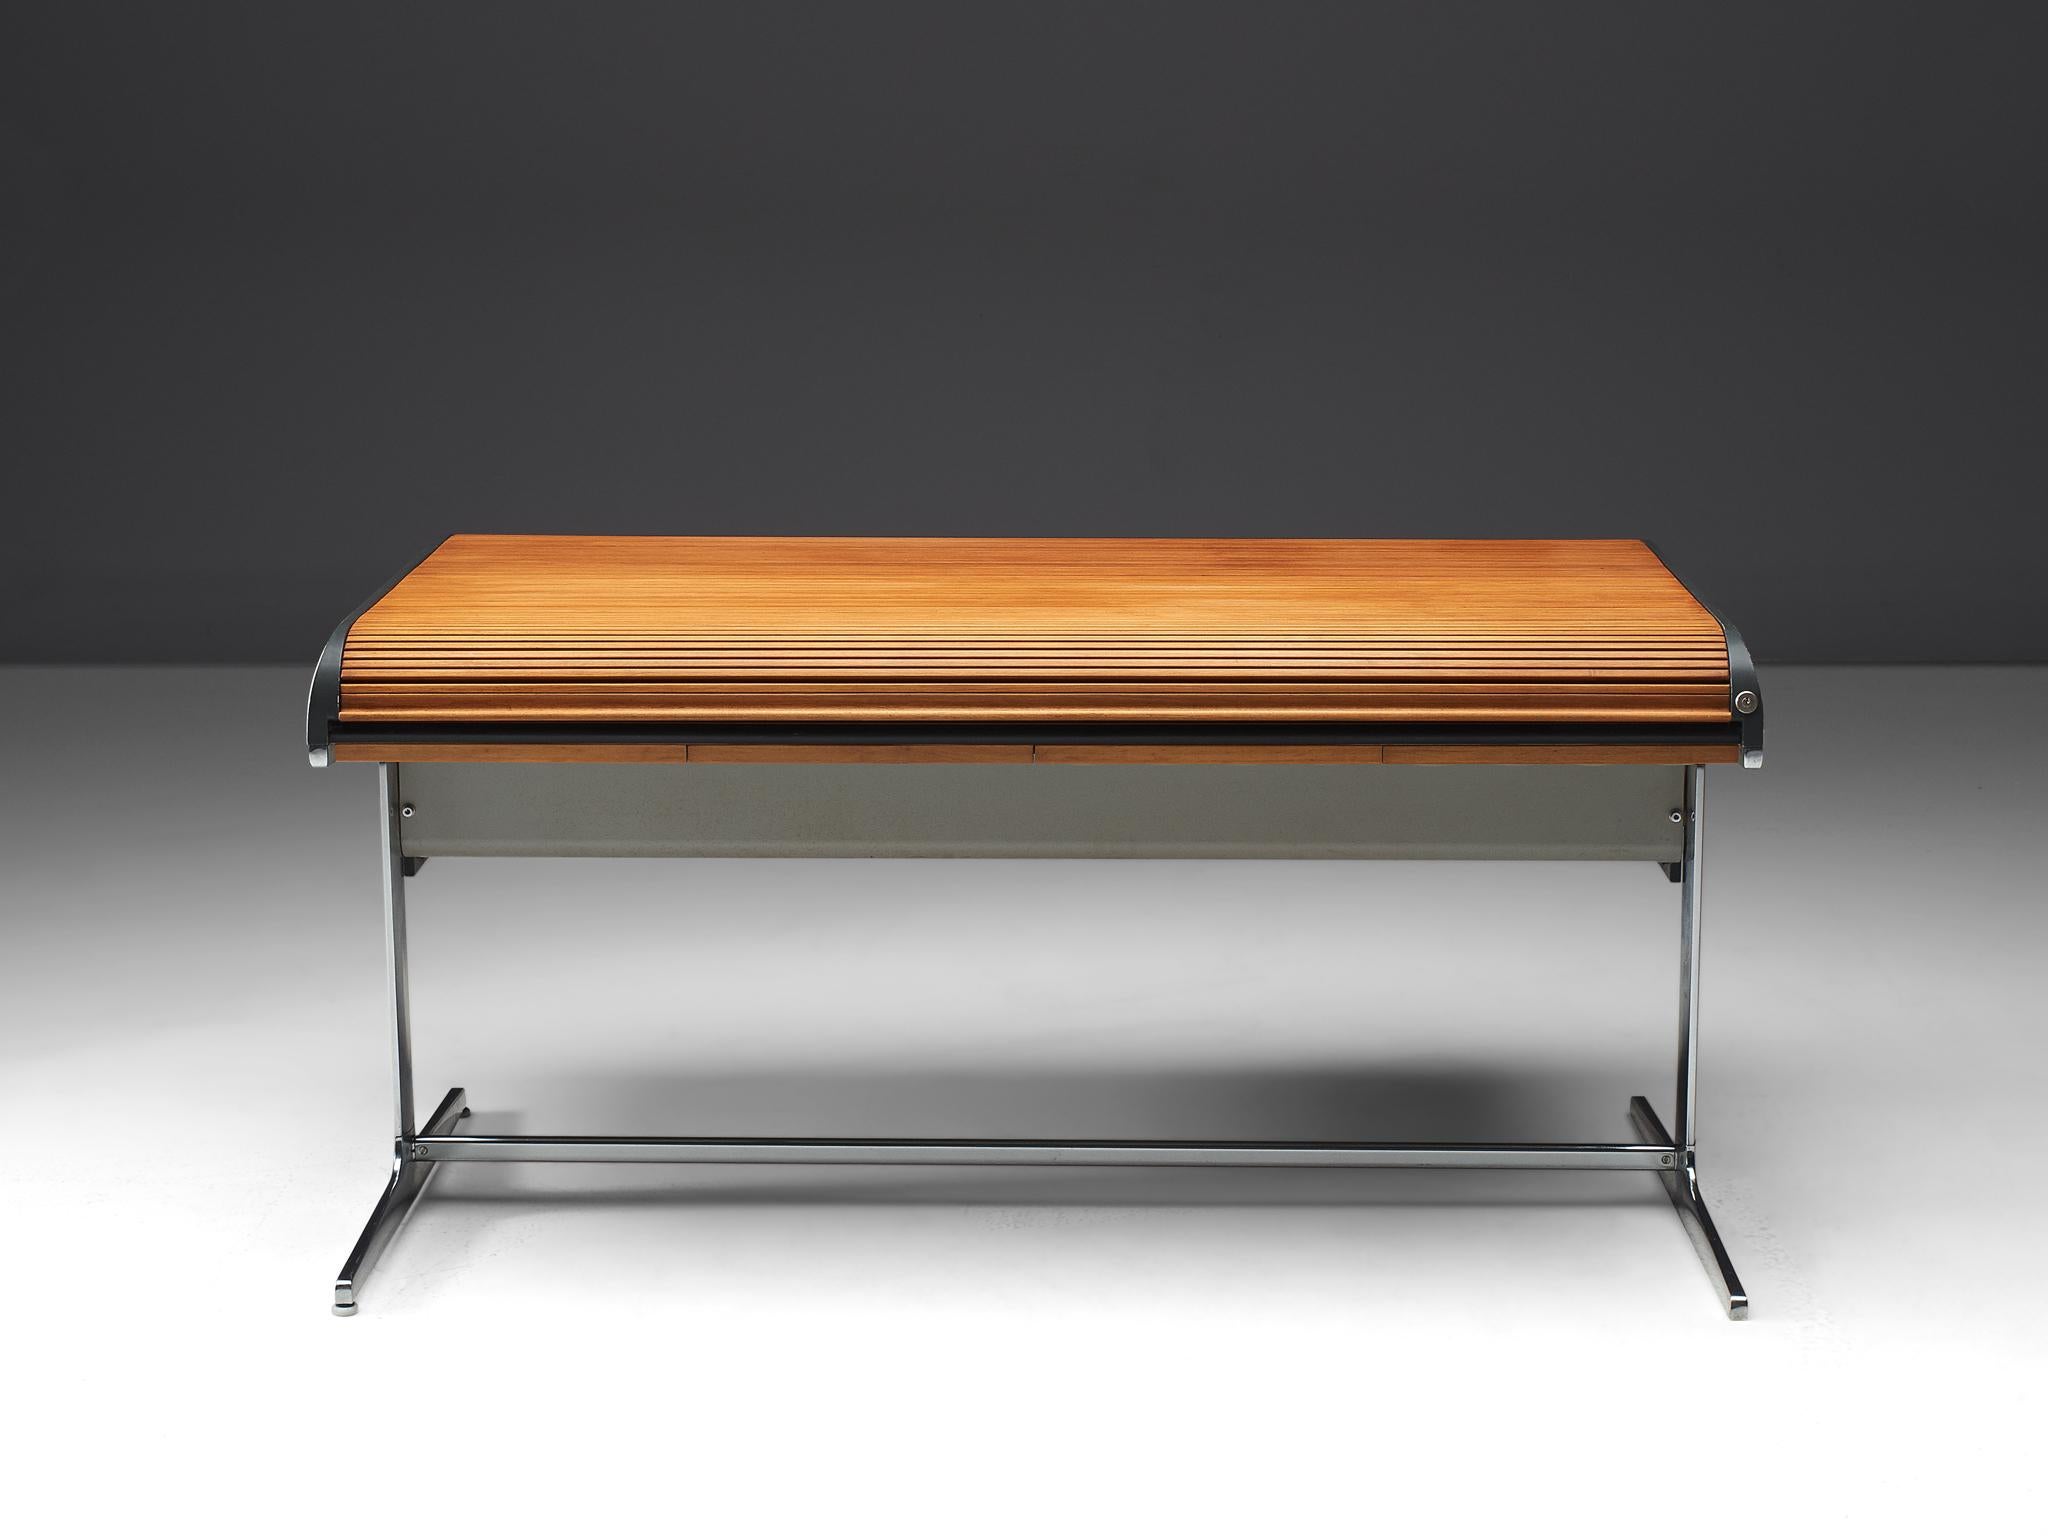 George Nelson for Herman Miller, roll top desk no. 64916, polished aluminum, plastic laminate, wood, United States, design 1953, production 1970s.

This roll top desk is designed as part of the Action Office 1 (AO1) furniture line by George